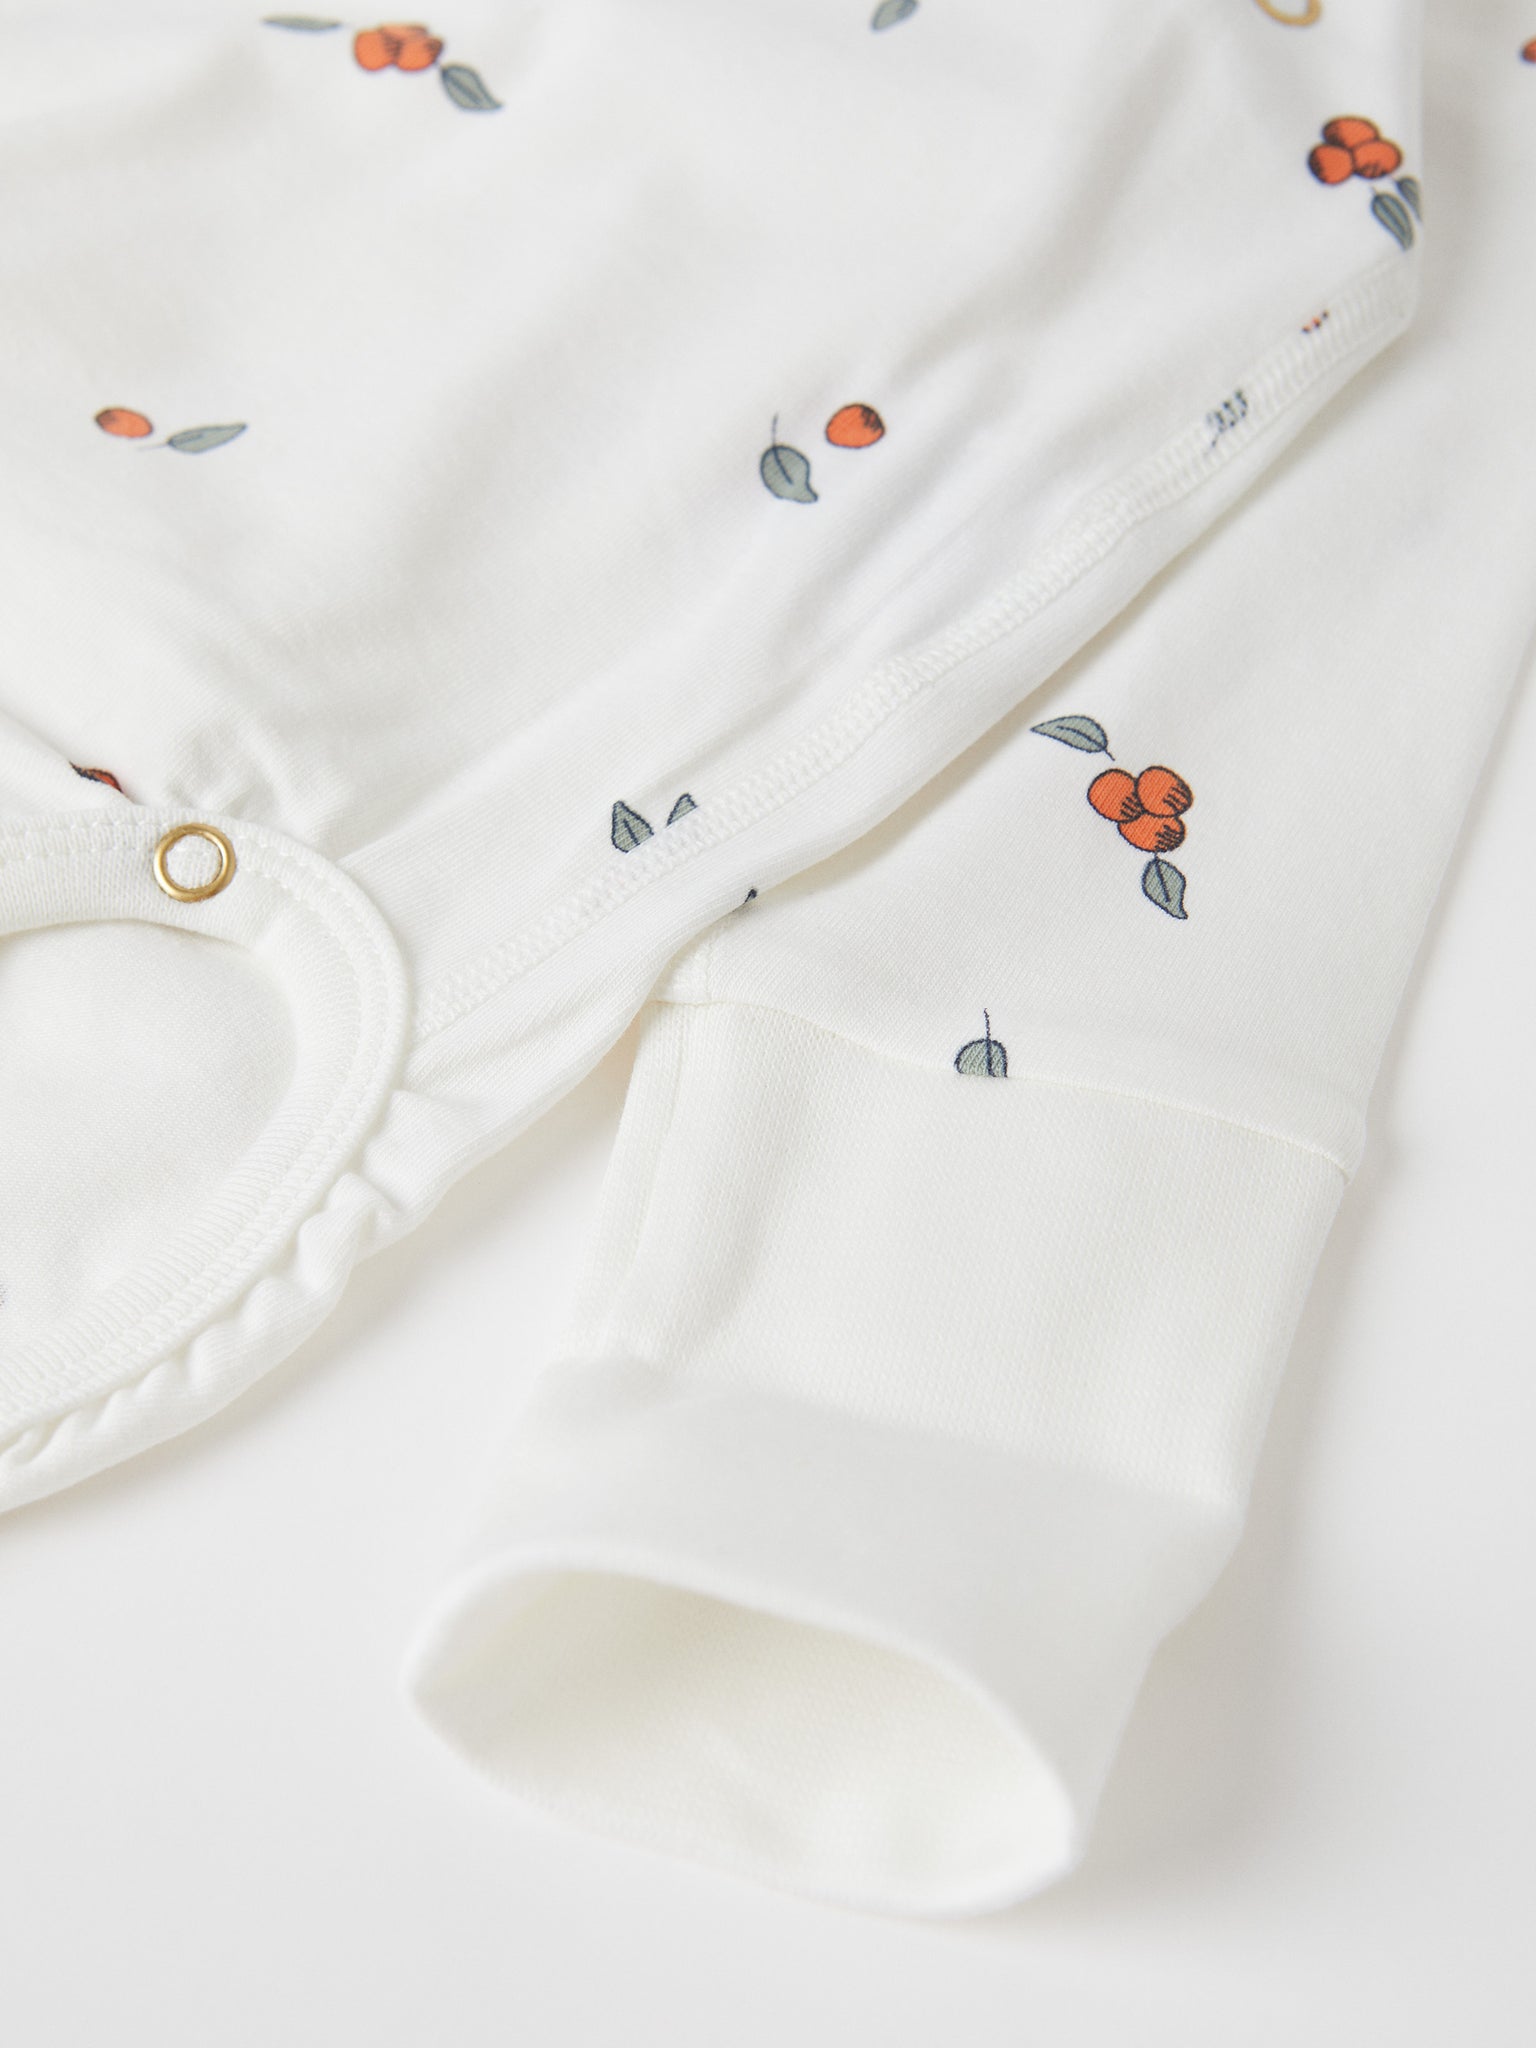 Organic Cotton White Wraparound Babygrow from the Polarn O. Pyret baby collection. Clothes made using sustainably sourced materials.